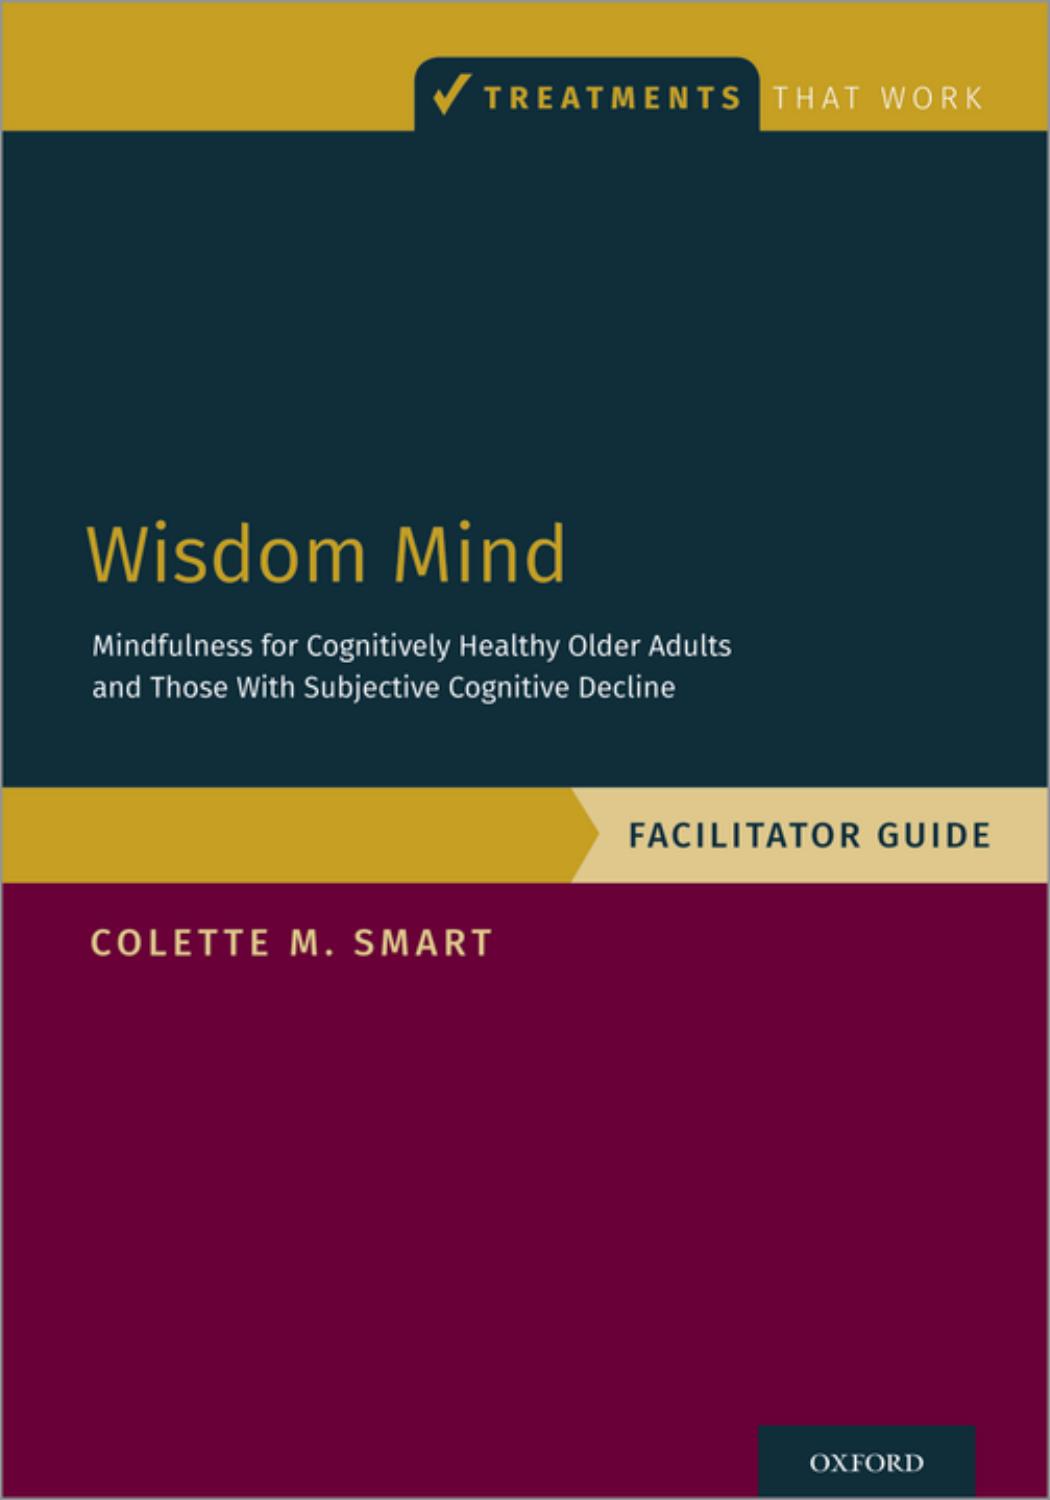 Wisdom Mind: Mindfulness for Cognitively Healthy Older Adults and Those With Subjective Cognitive Decline, Facilitator Guide (Treatments That Work) by Colette M. Smart